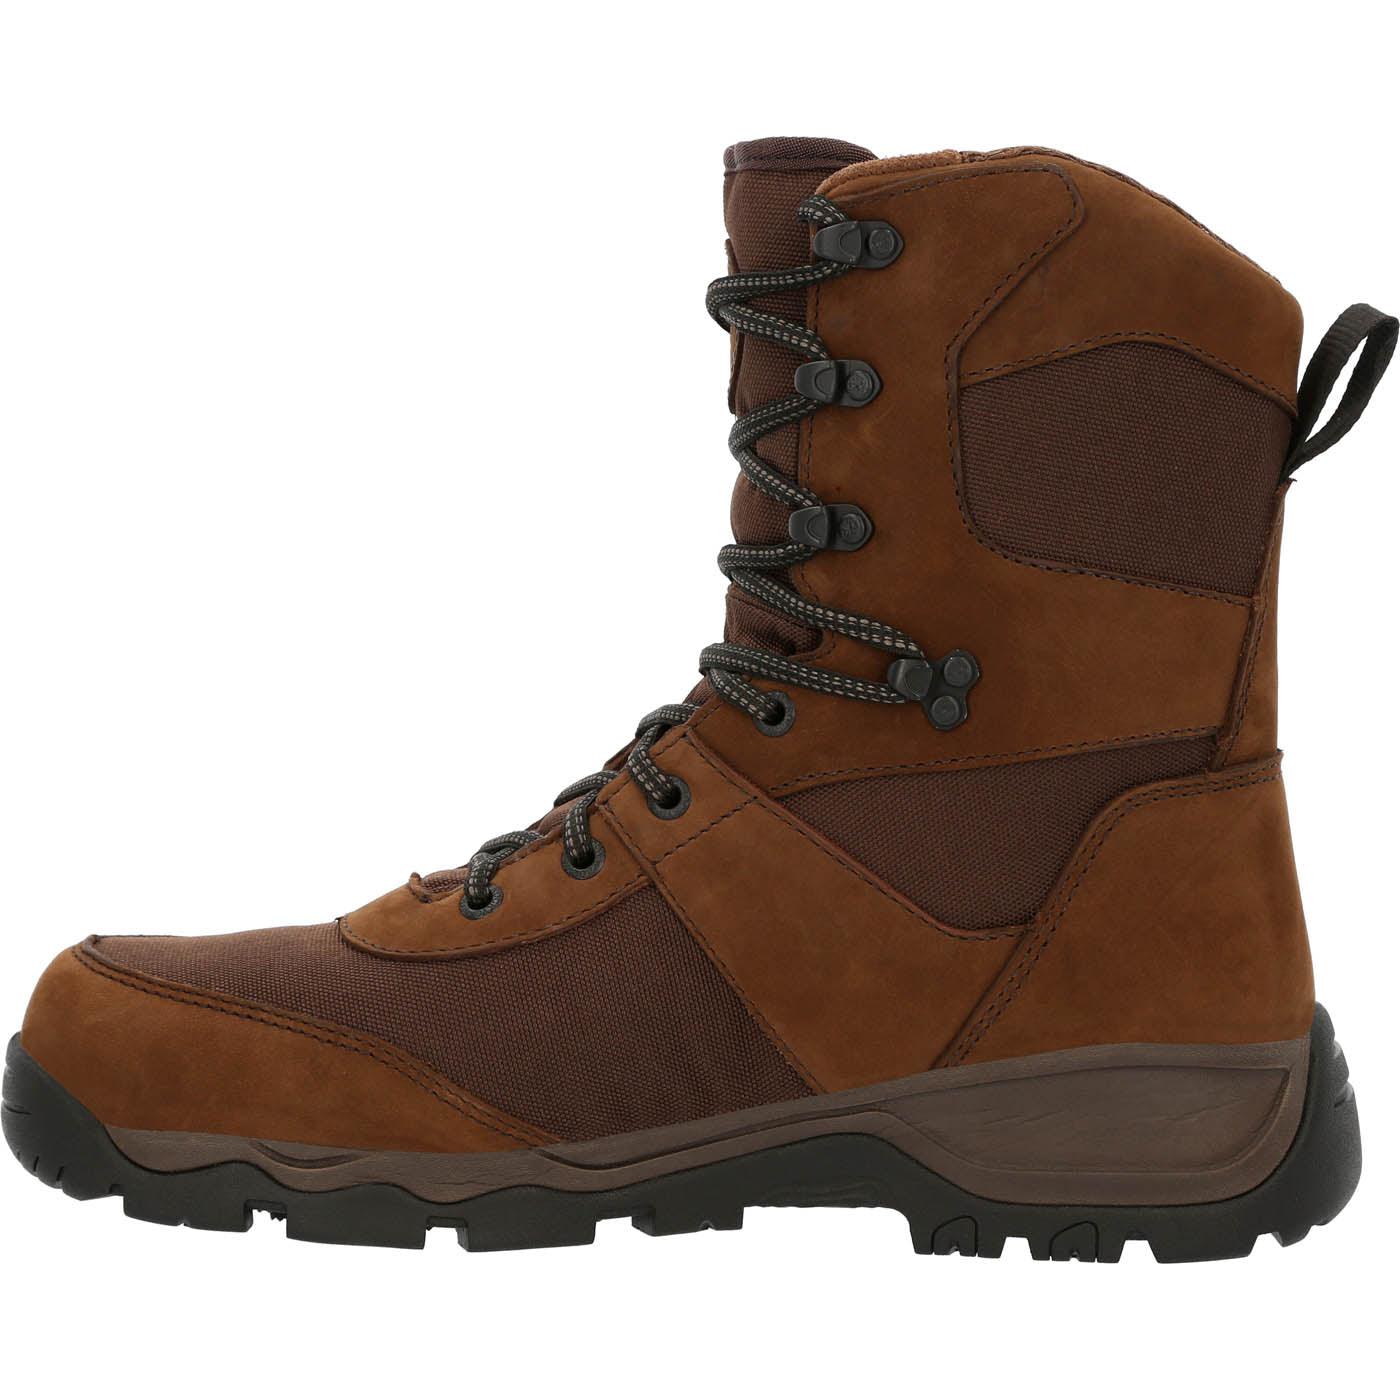 Rocky Red Mountain Waterproof 400g Insulated Outdoor Boot - Flyclothing LLC